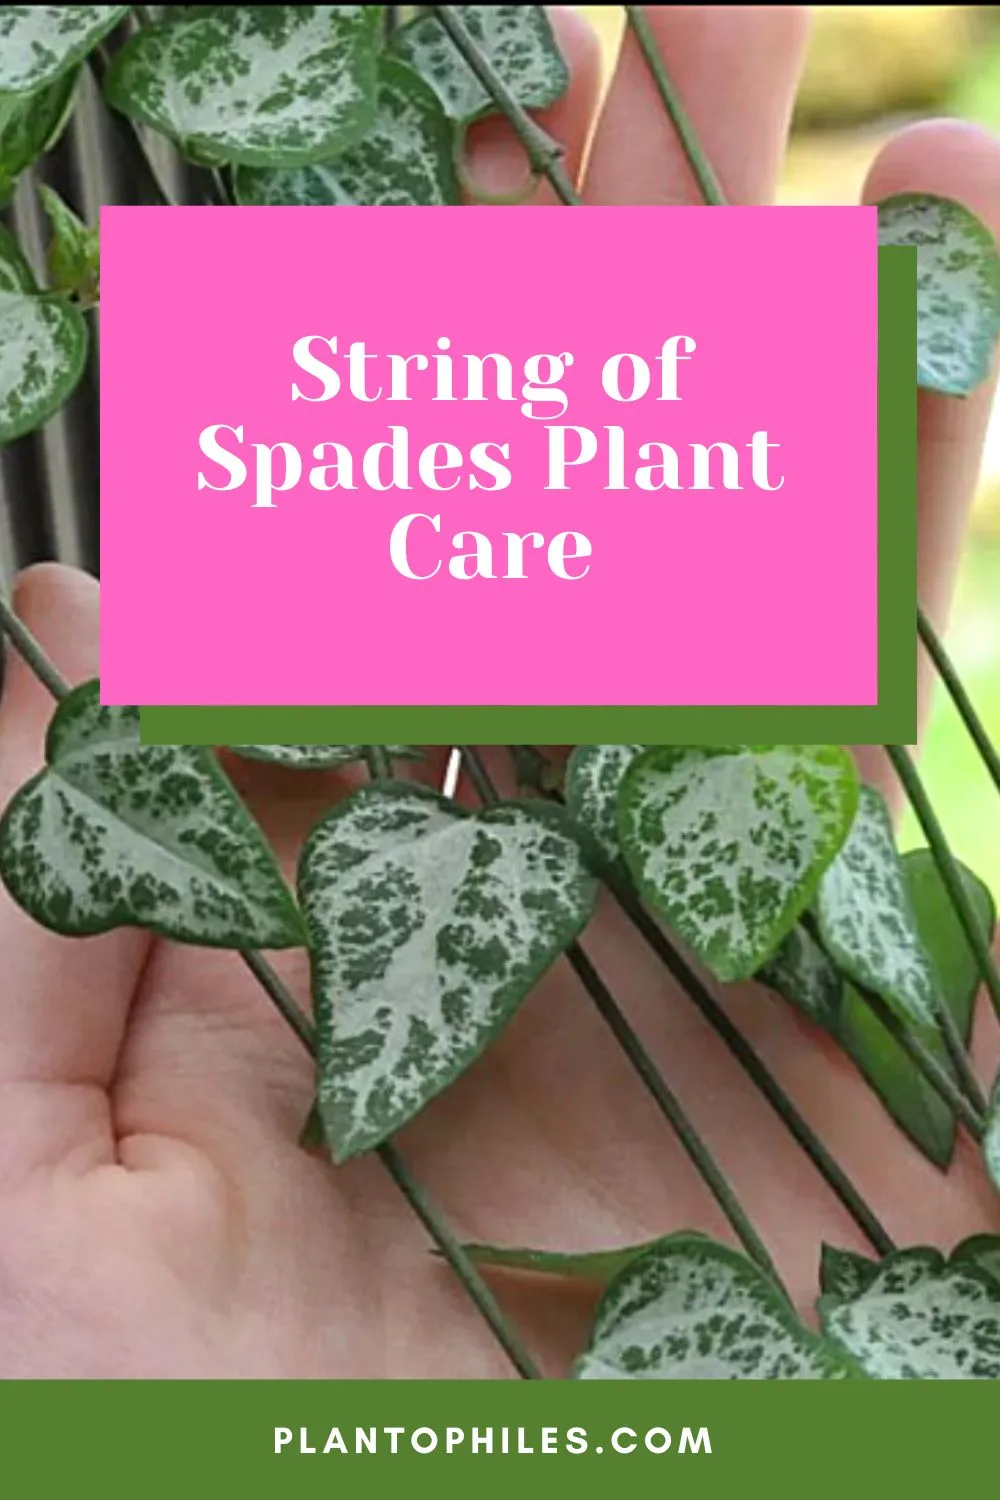 String of Spades Plant Care